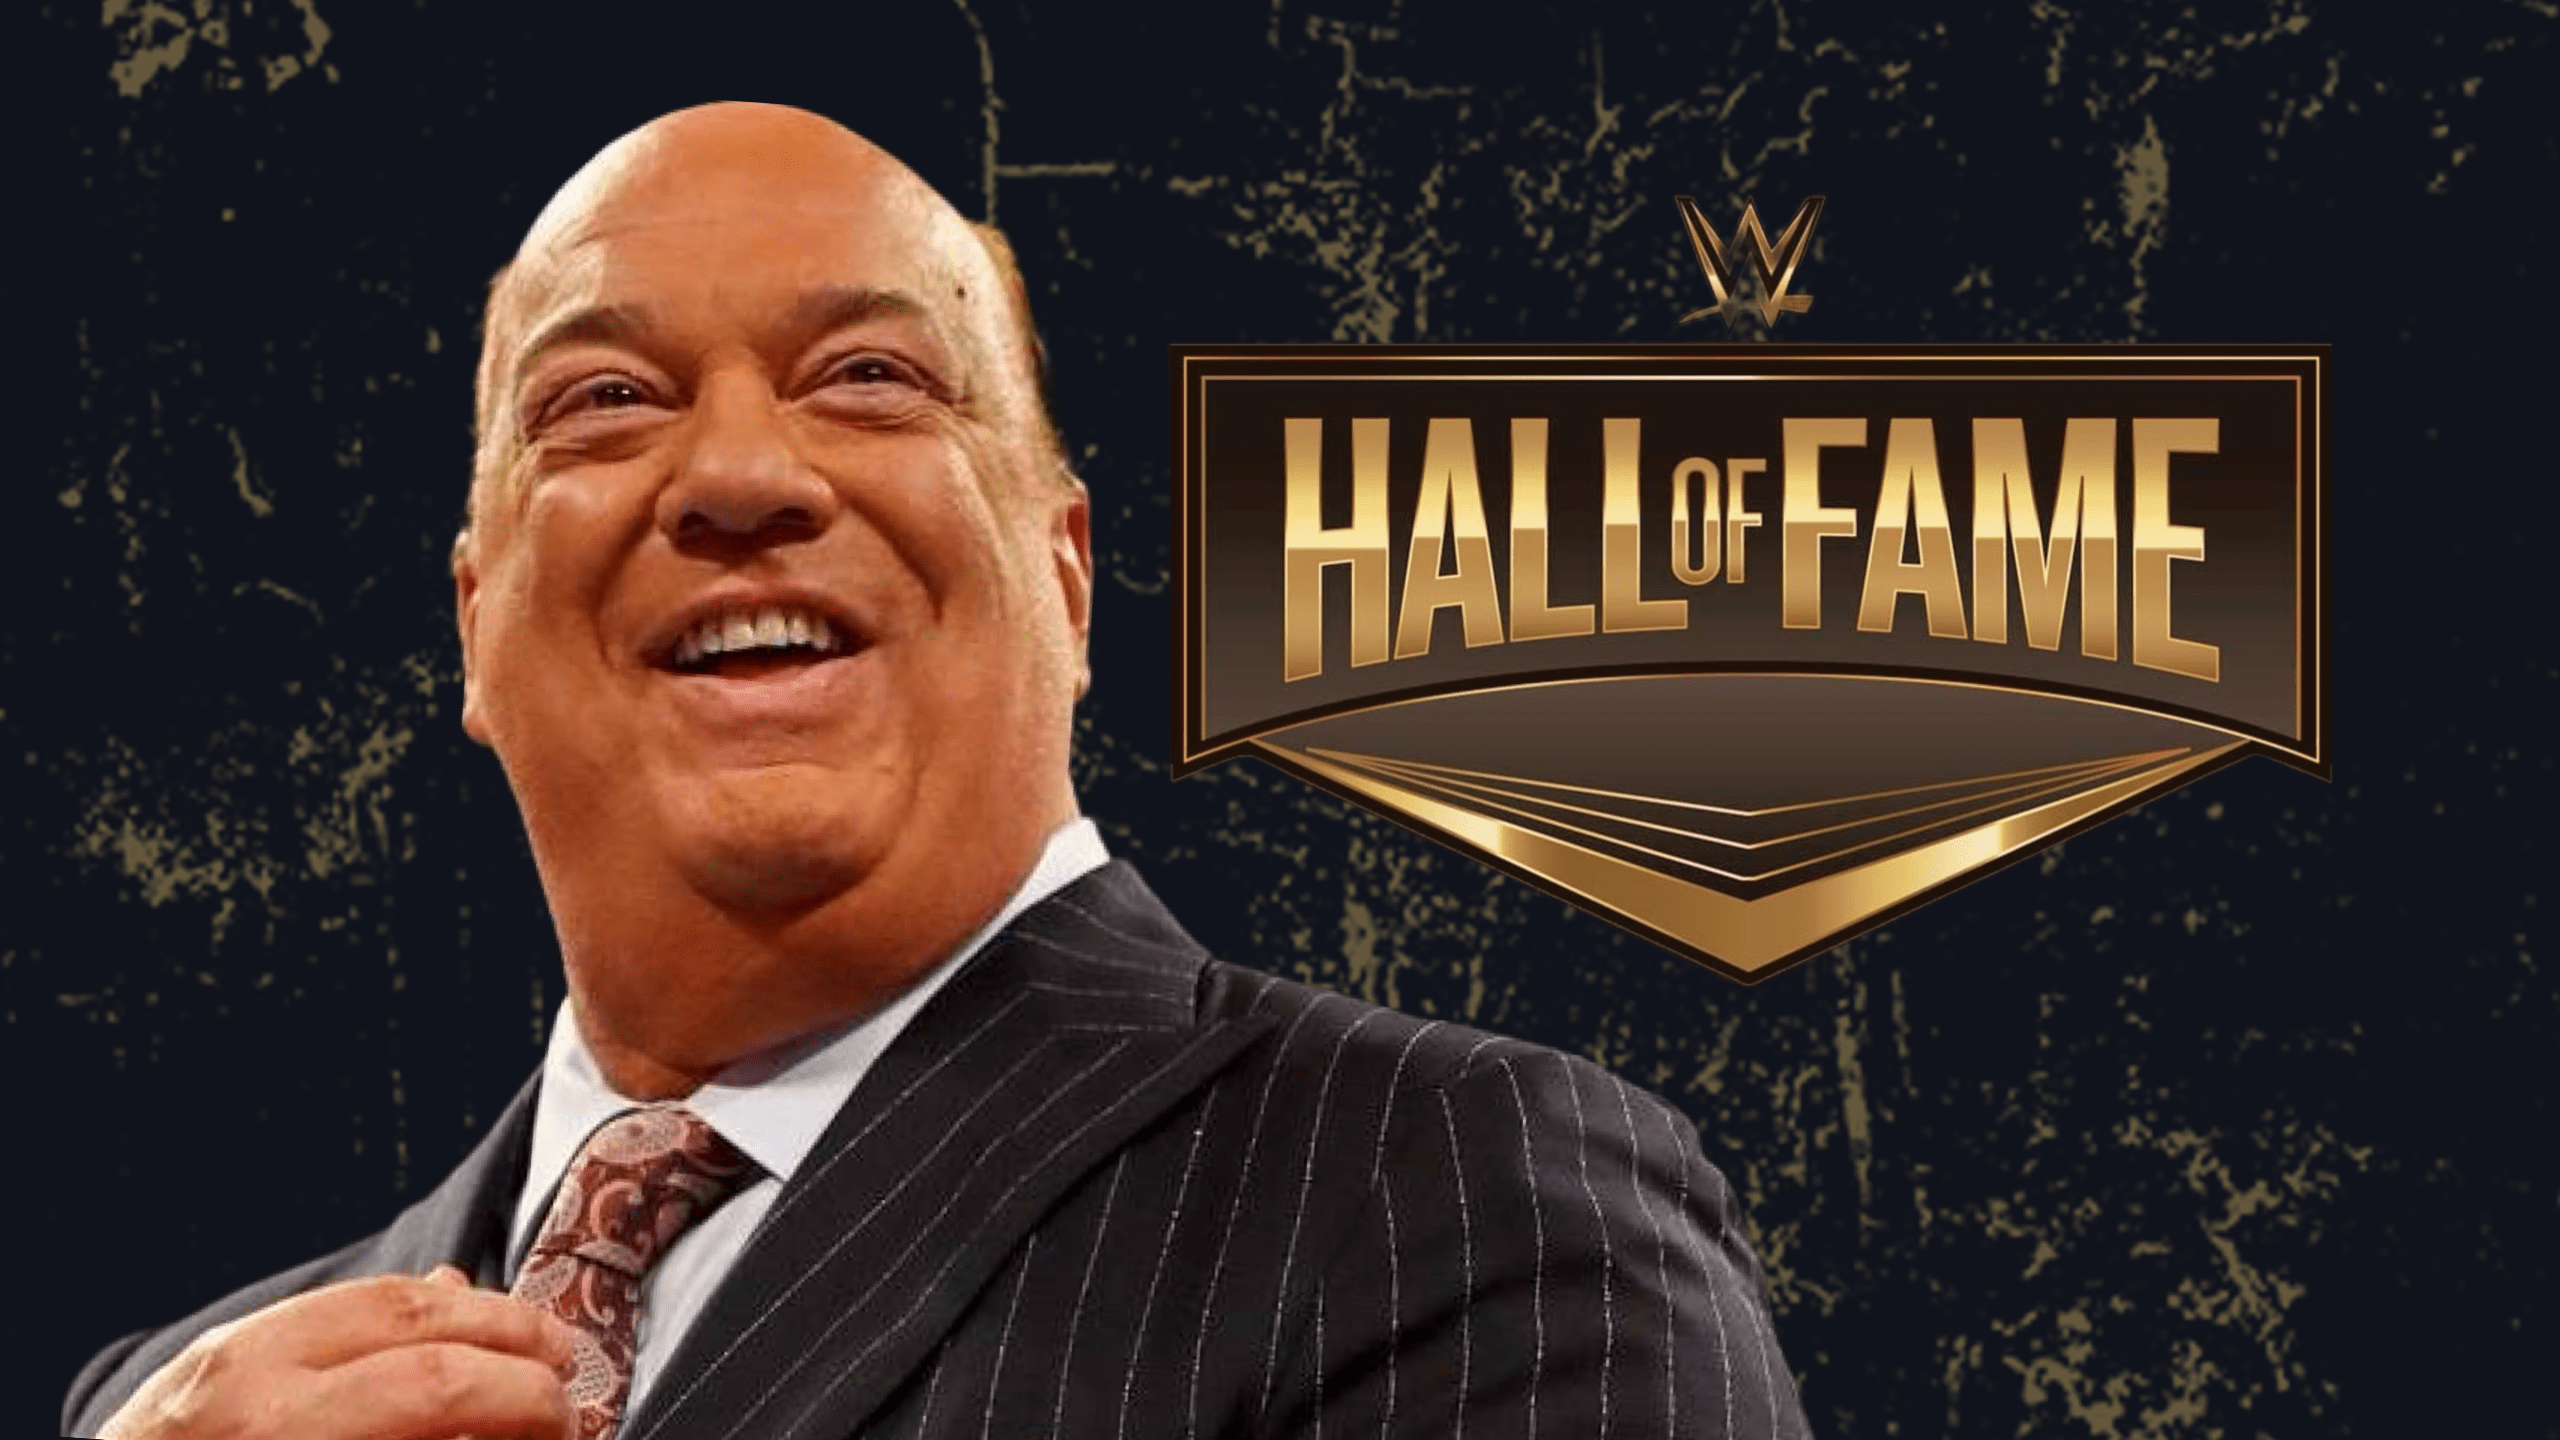 Paul Heyman Discusses His Approach to Delivering His WWE Hall of Fame Speech